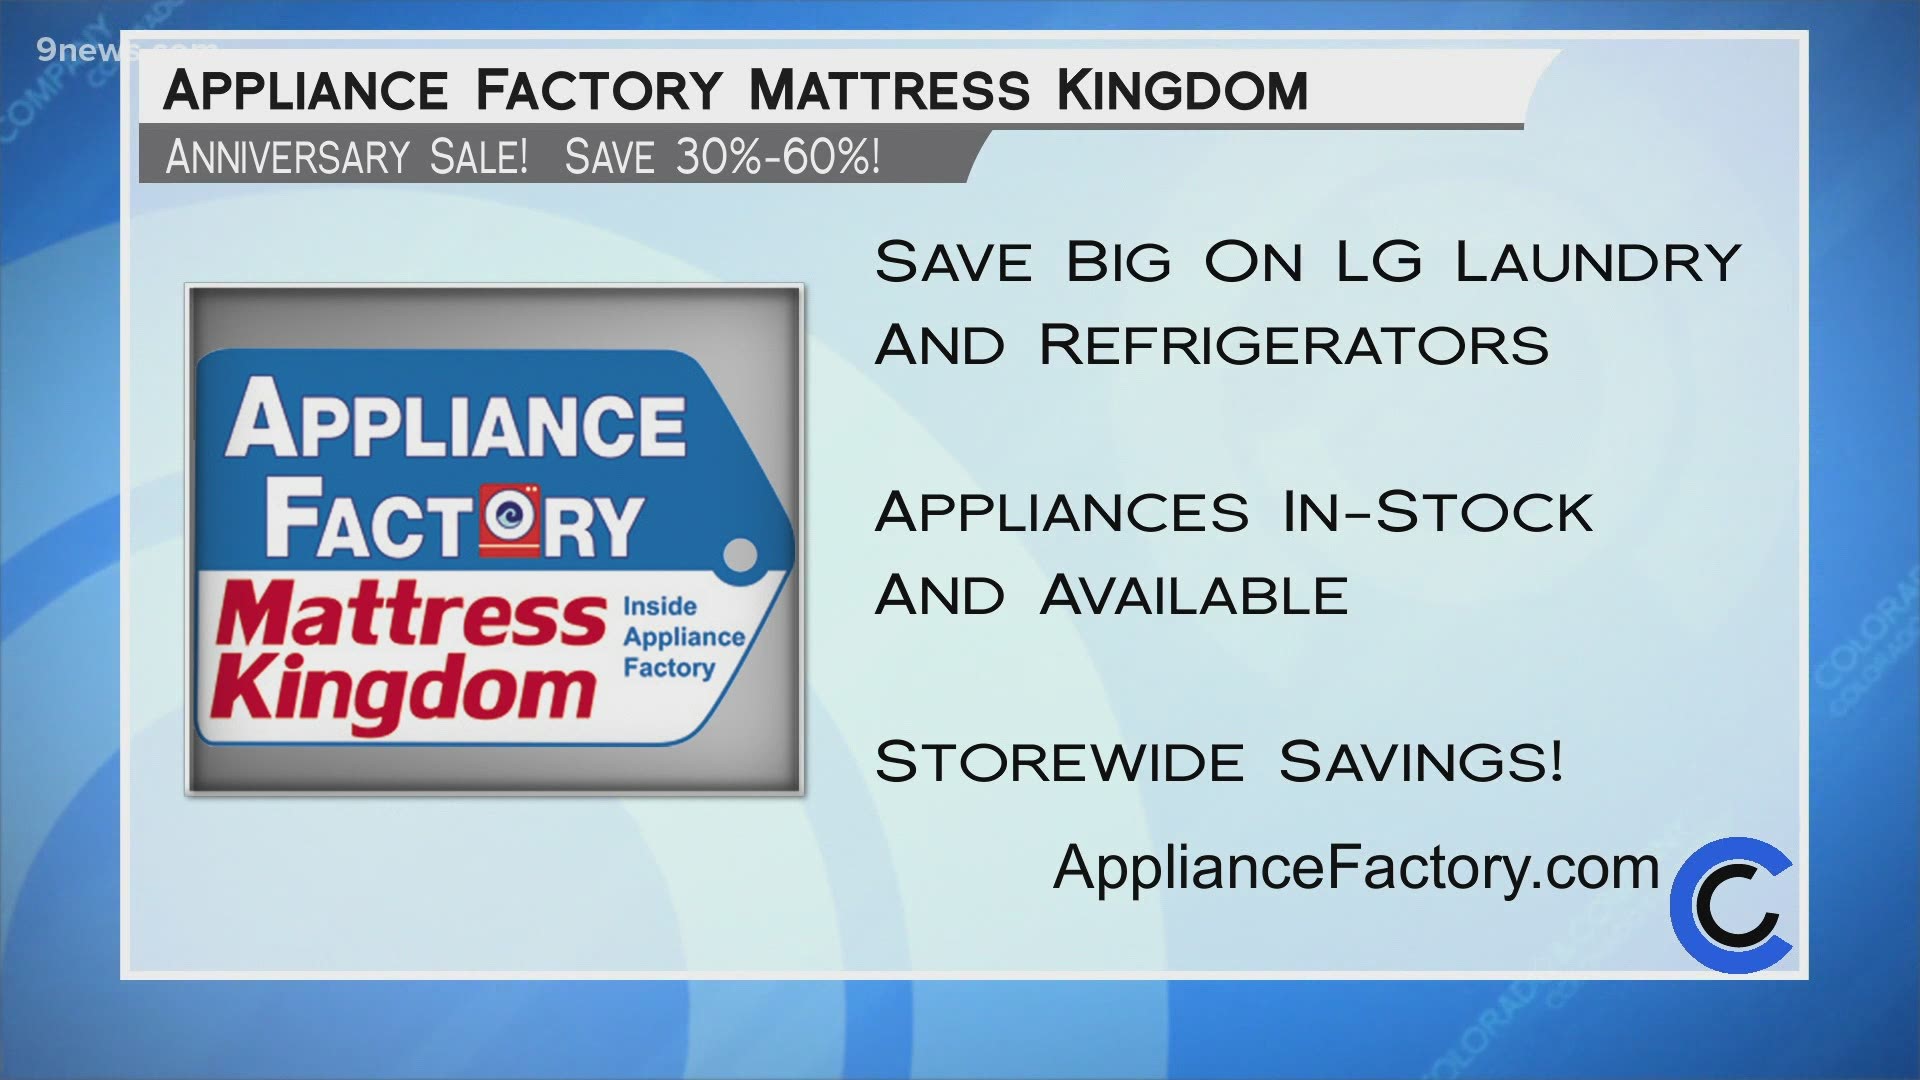 Appliance Factory and Mattress Kingdom has deals on LG Appliances for up to 60% off! Shop in store or online at ApplianceFactory.com.